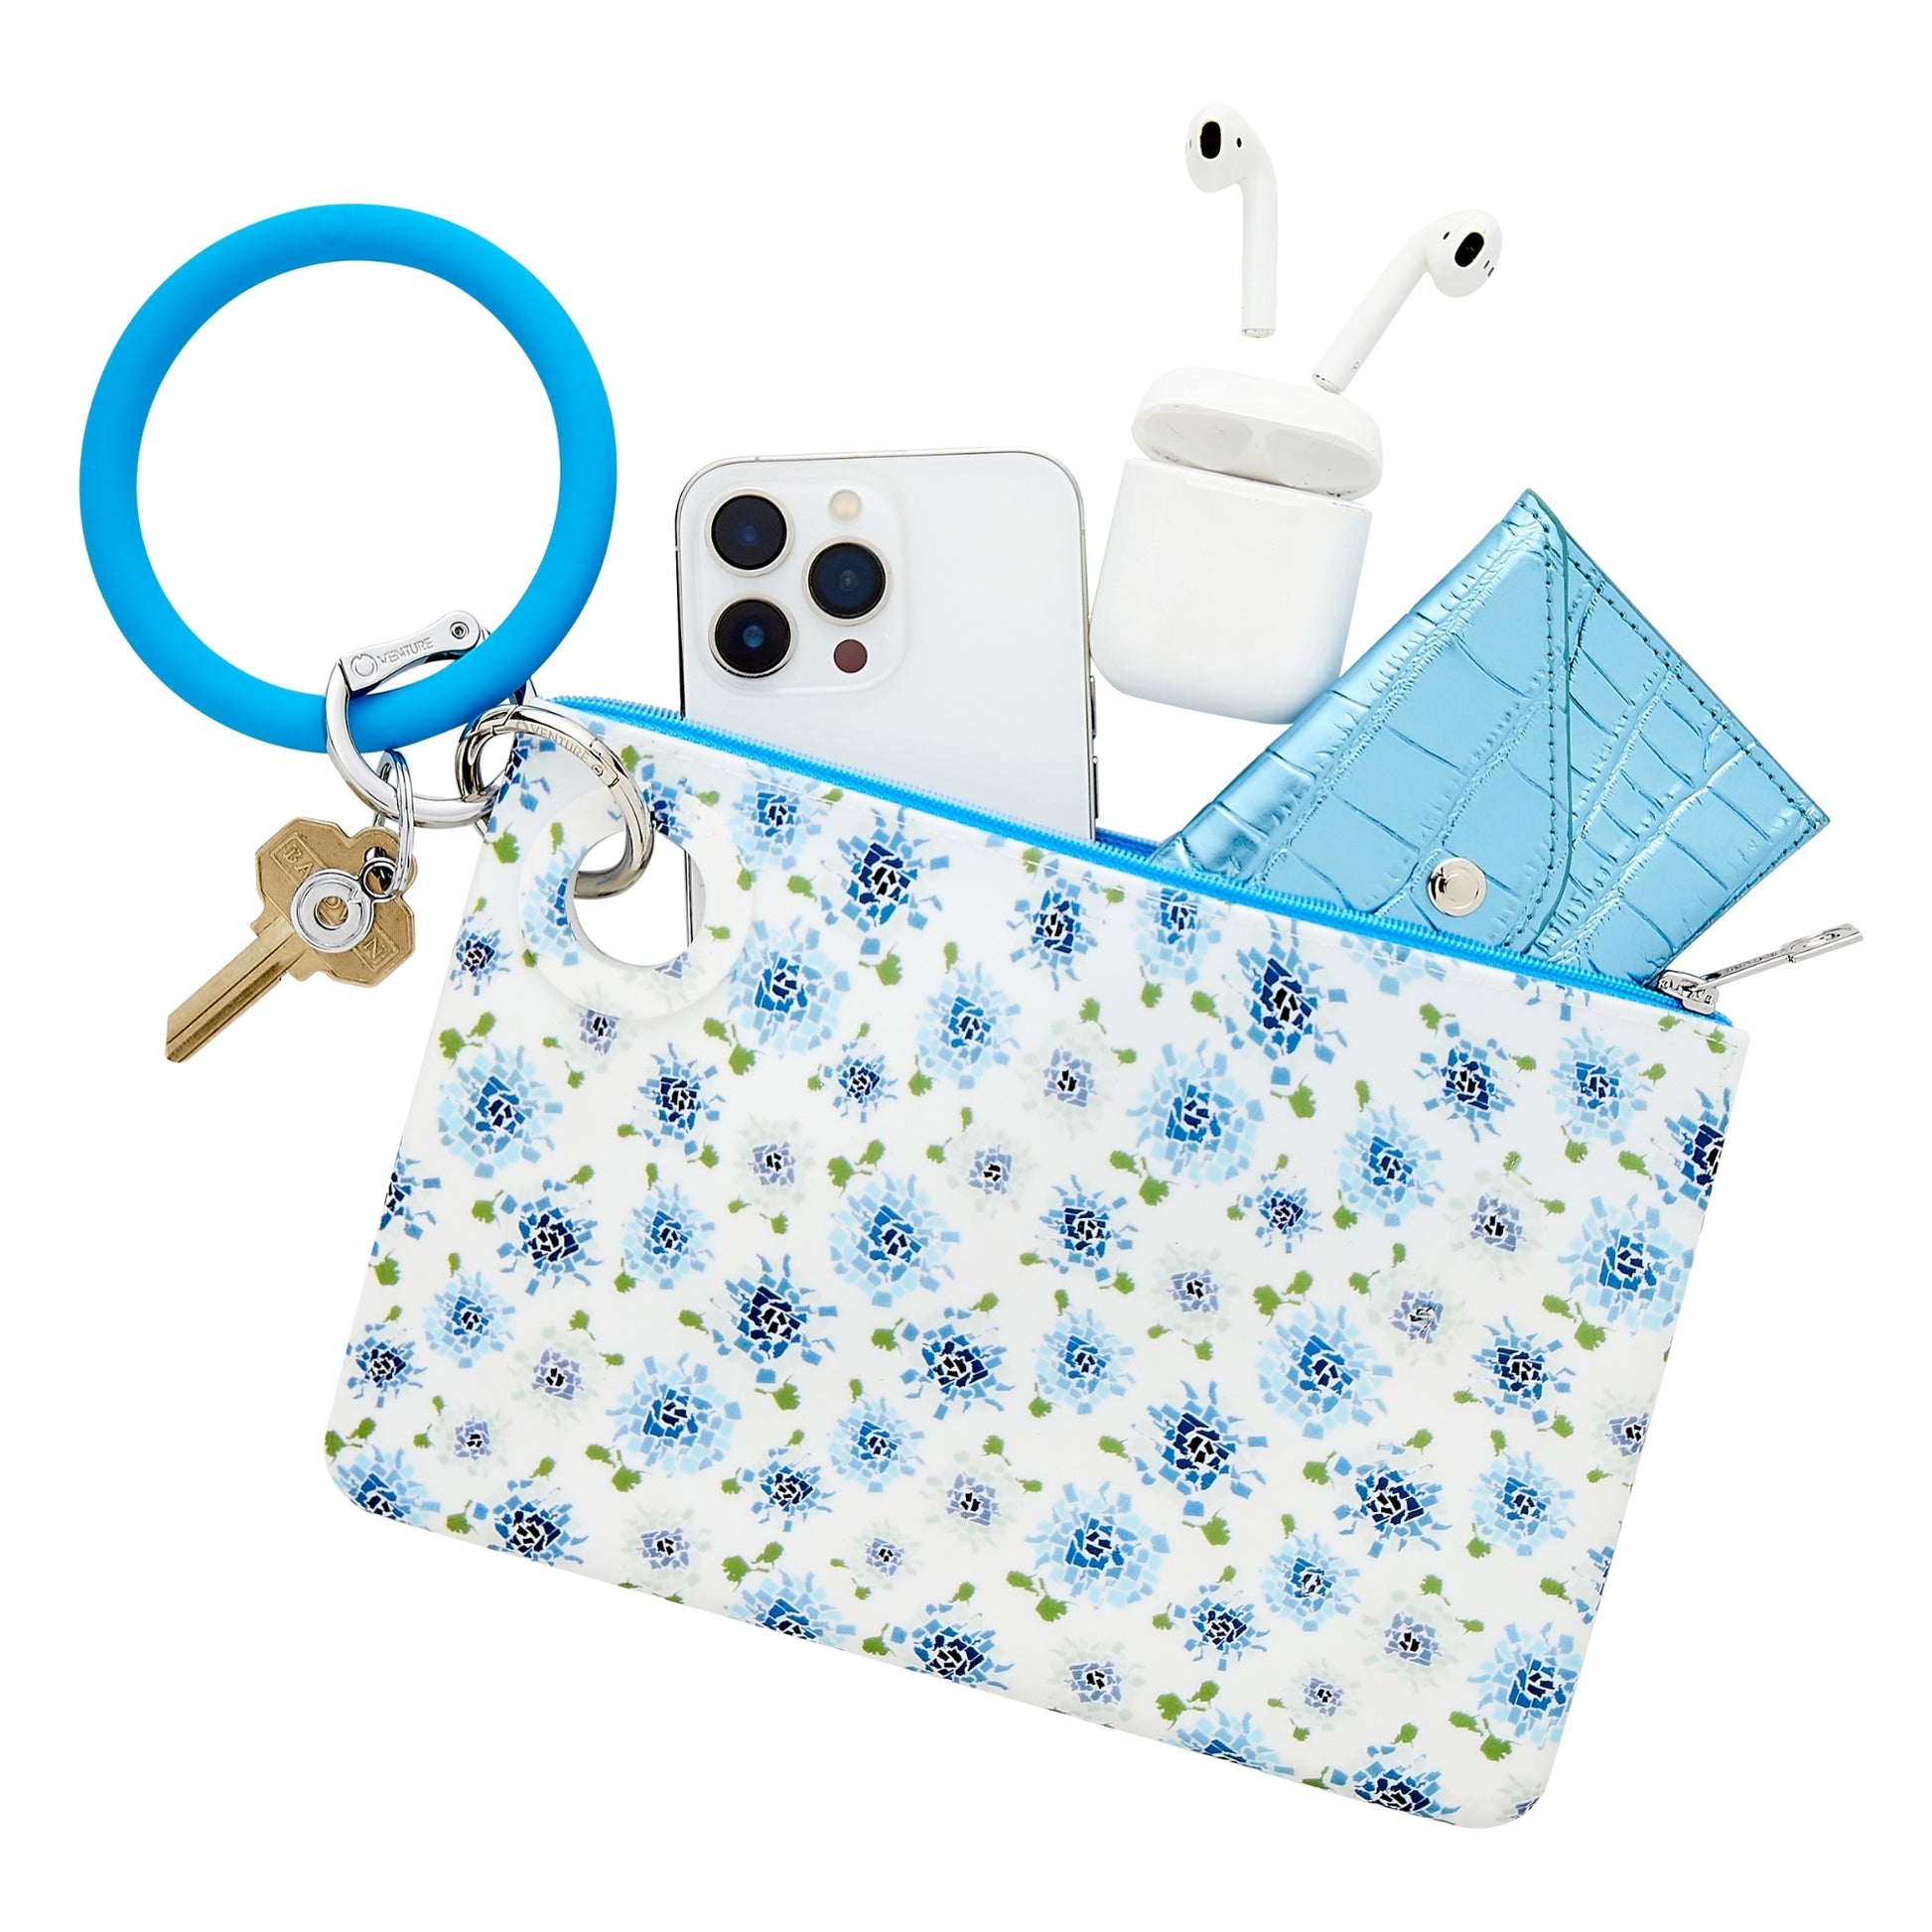 Stylish Large Pouch Wristlet with Phone Holder in blue floral.